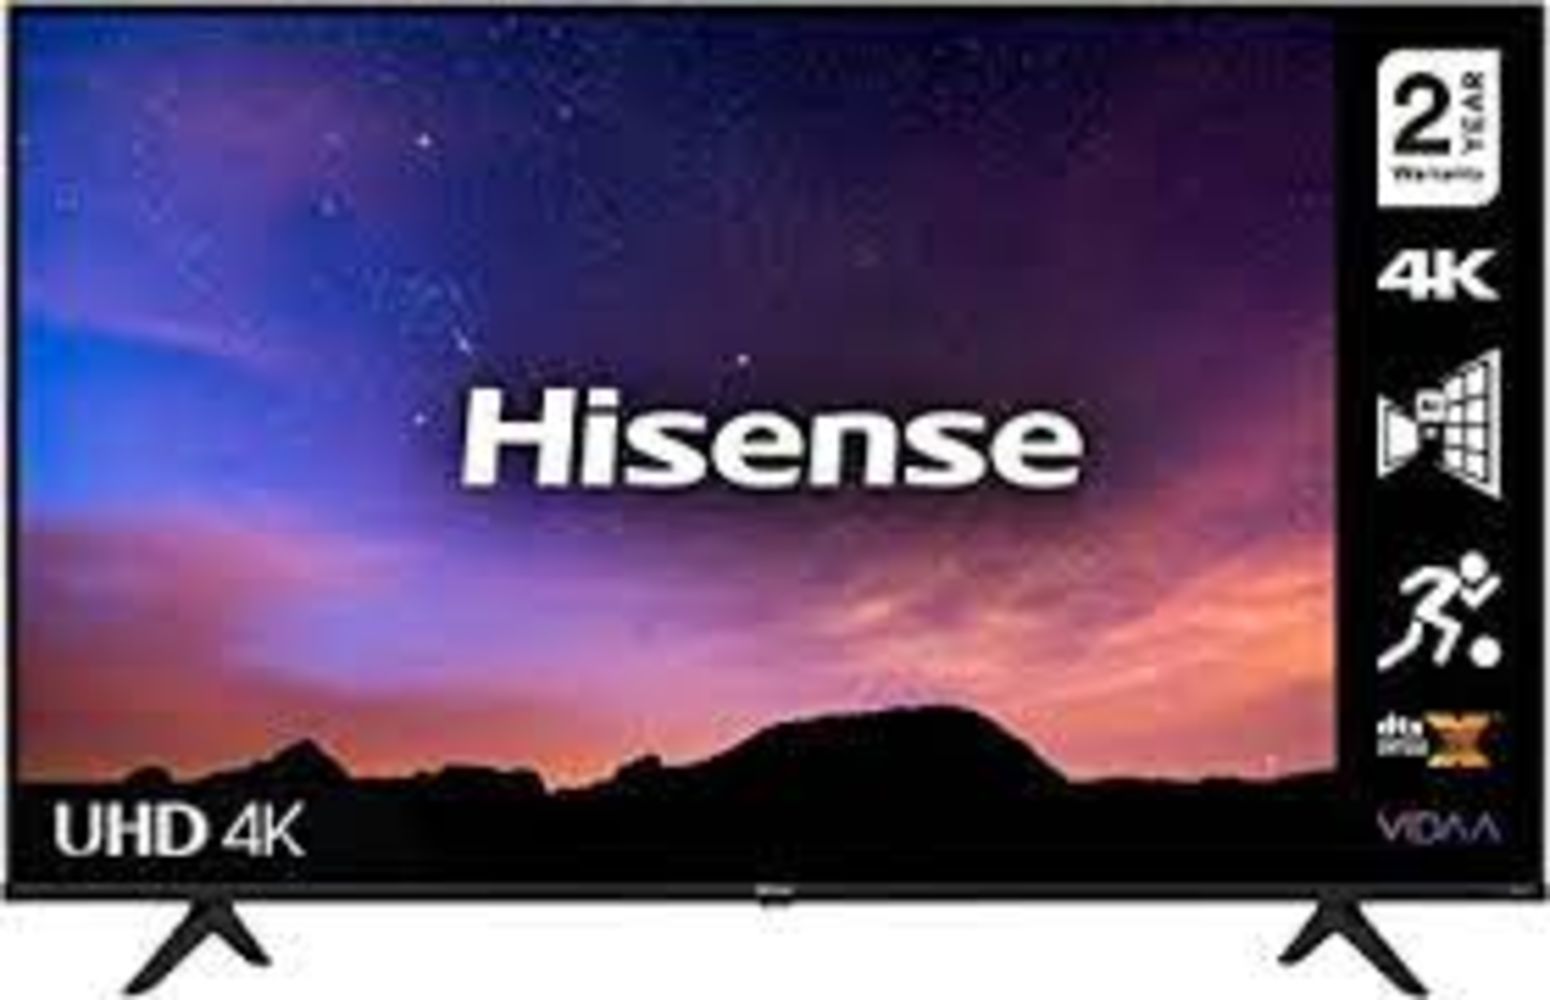 TVs, Laptops & 2 in 1 Laptops/Tablets. Hisense, Dell, Apple, HP, Acer, Asus & More. Collection & Delivery Available